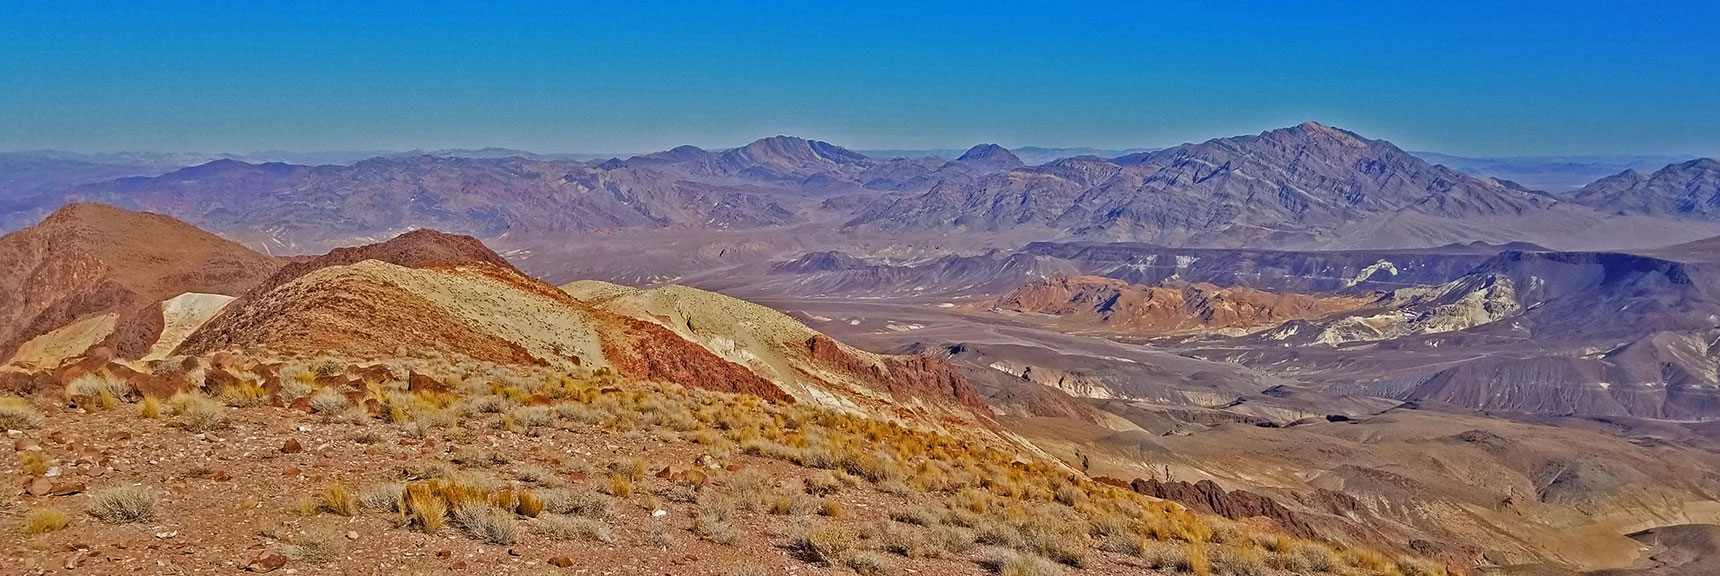 View Northeast from Dante's Ridge | Dante's View to Mt. Perry | Death Valley National Park, CA